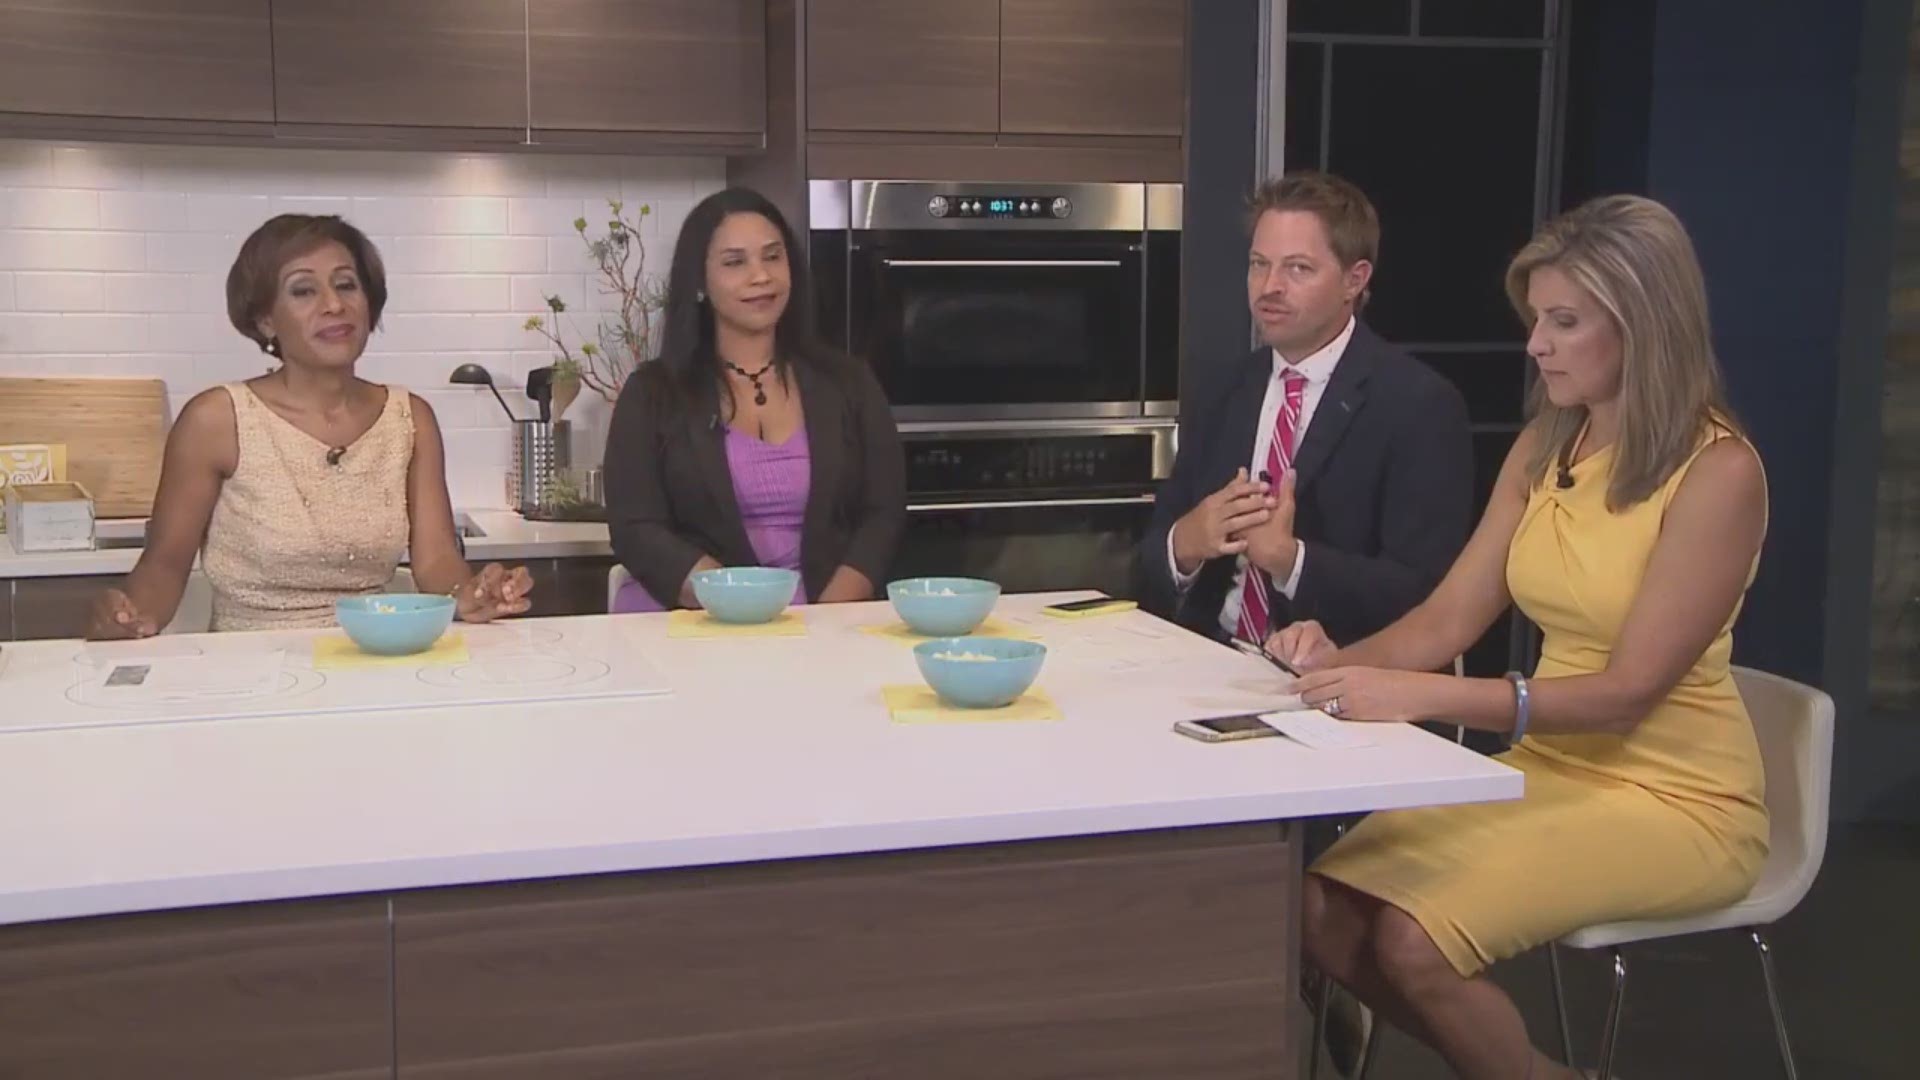 Getting kids to eat healthy can be difficult. Monica, Tracy, Rob and special guest mom Ashley discuss tips and tricks to get kids to eat their greens.